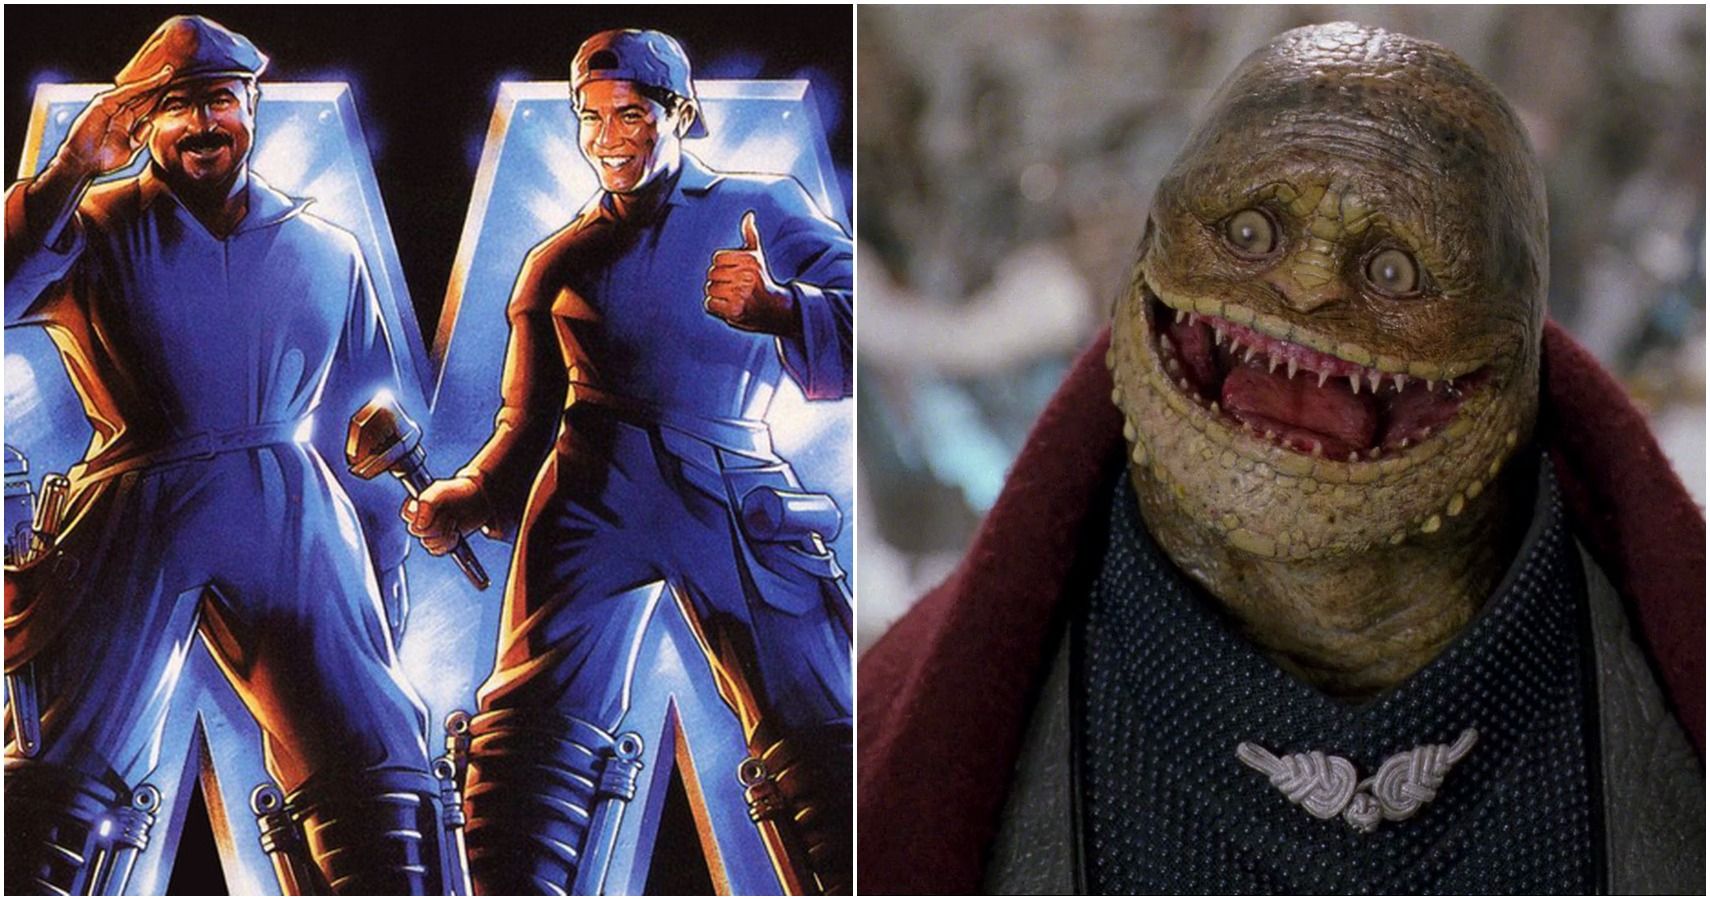 10 Weird Facts You Didn’t Know About The Original Super Mario Bros Movie